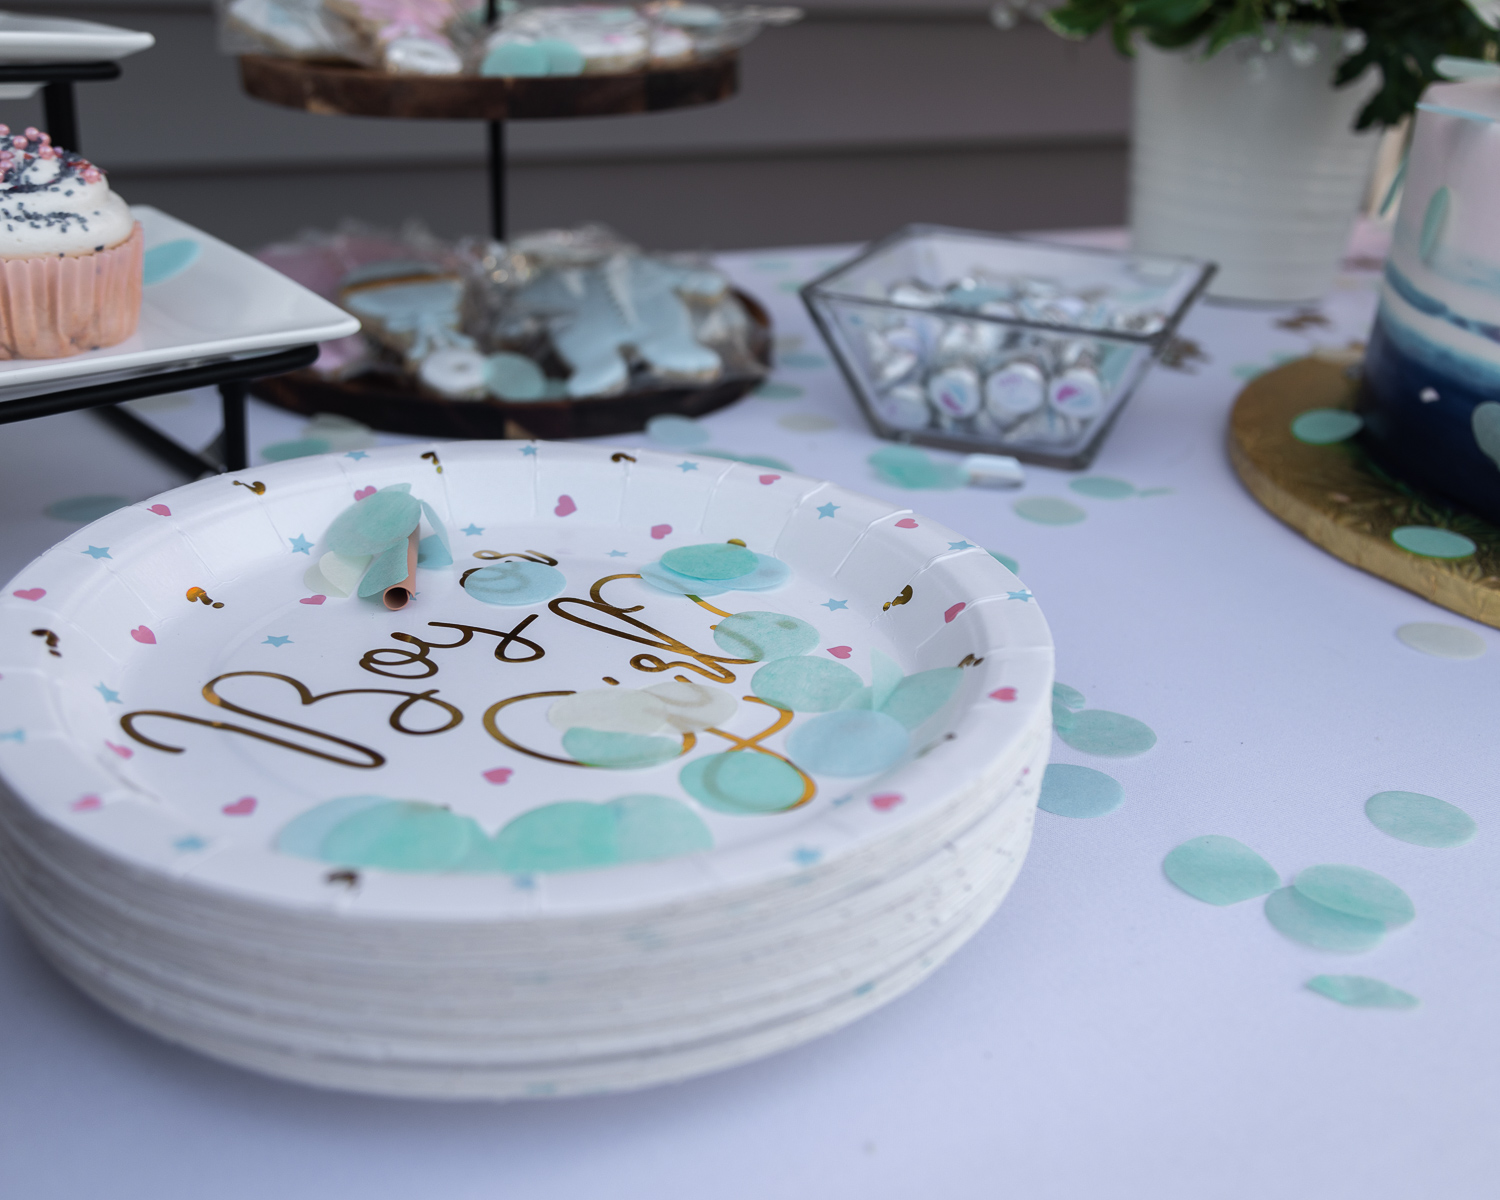 lawler-gender-reveal-party-dessert-table-with-confetti-the-glamorous-gal-blog